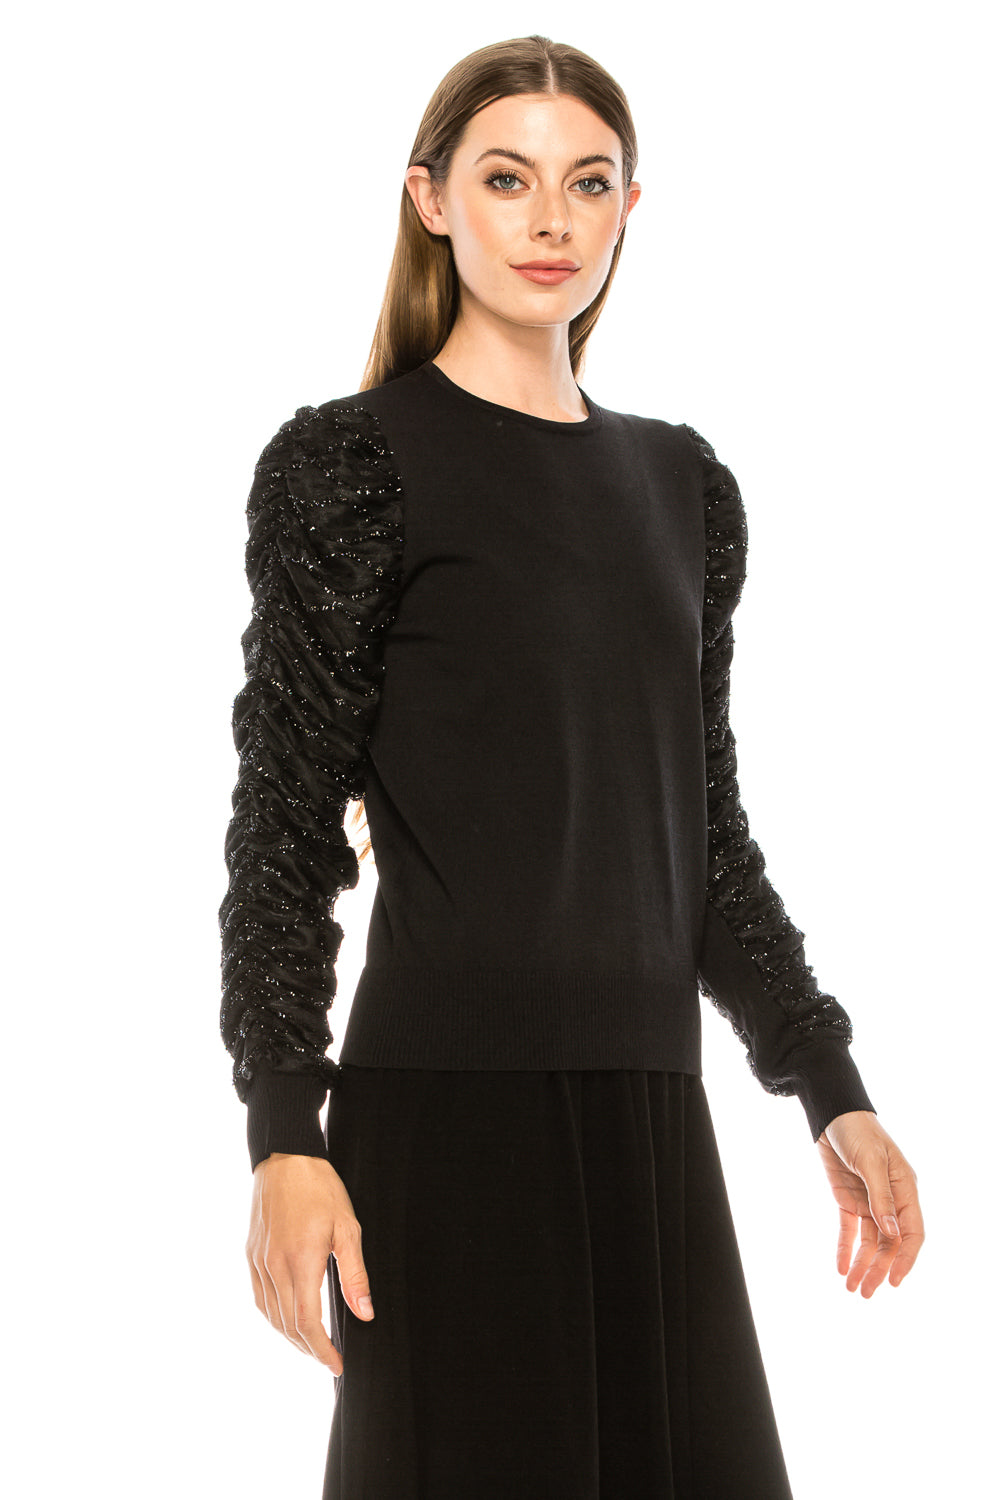 Black Sequin Rouched Dressy Sleeve Sweater